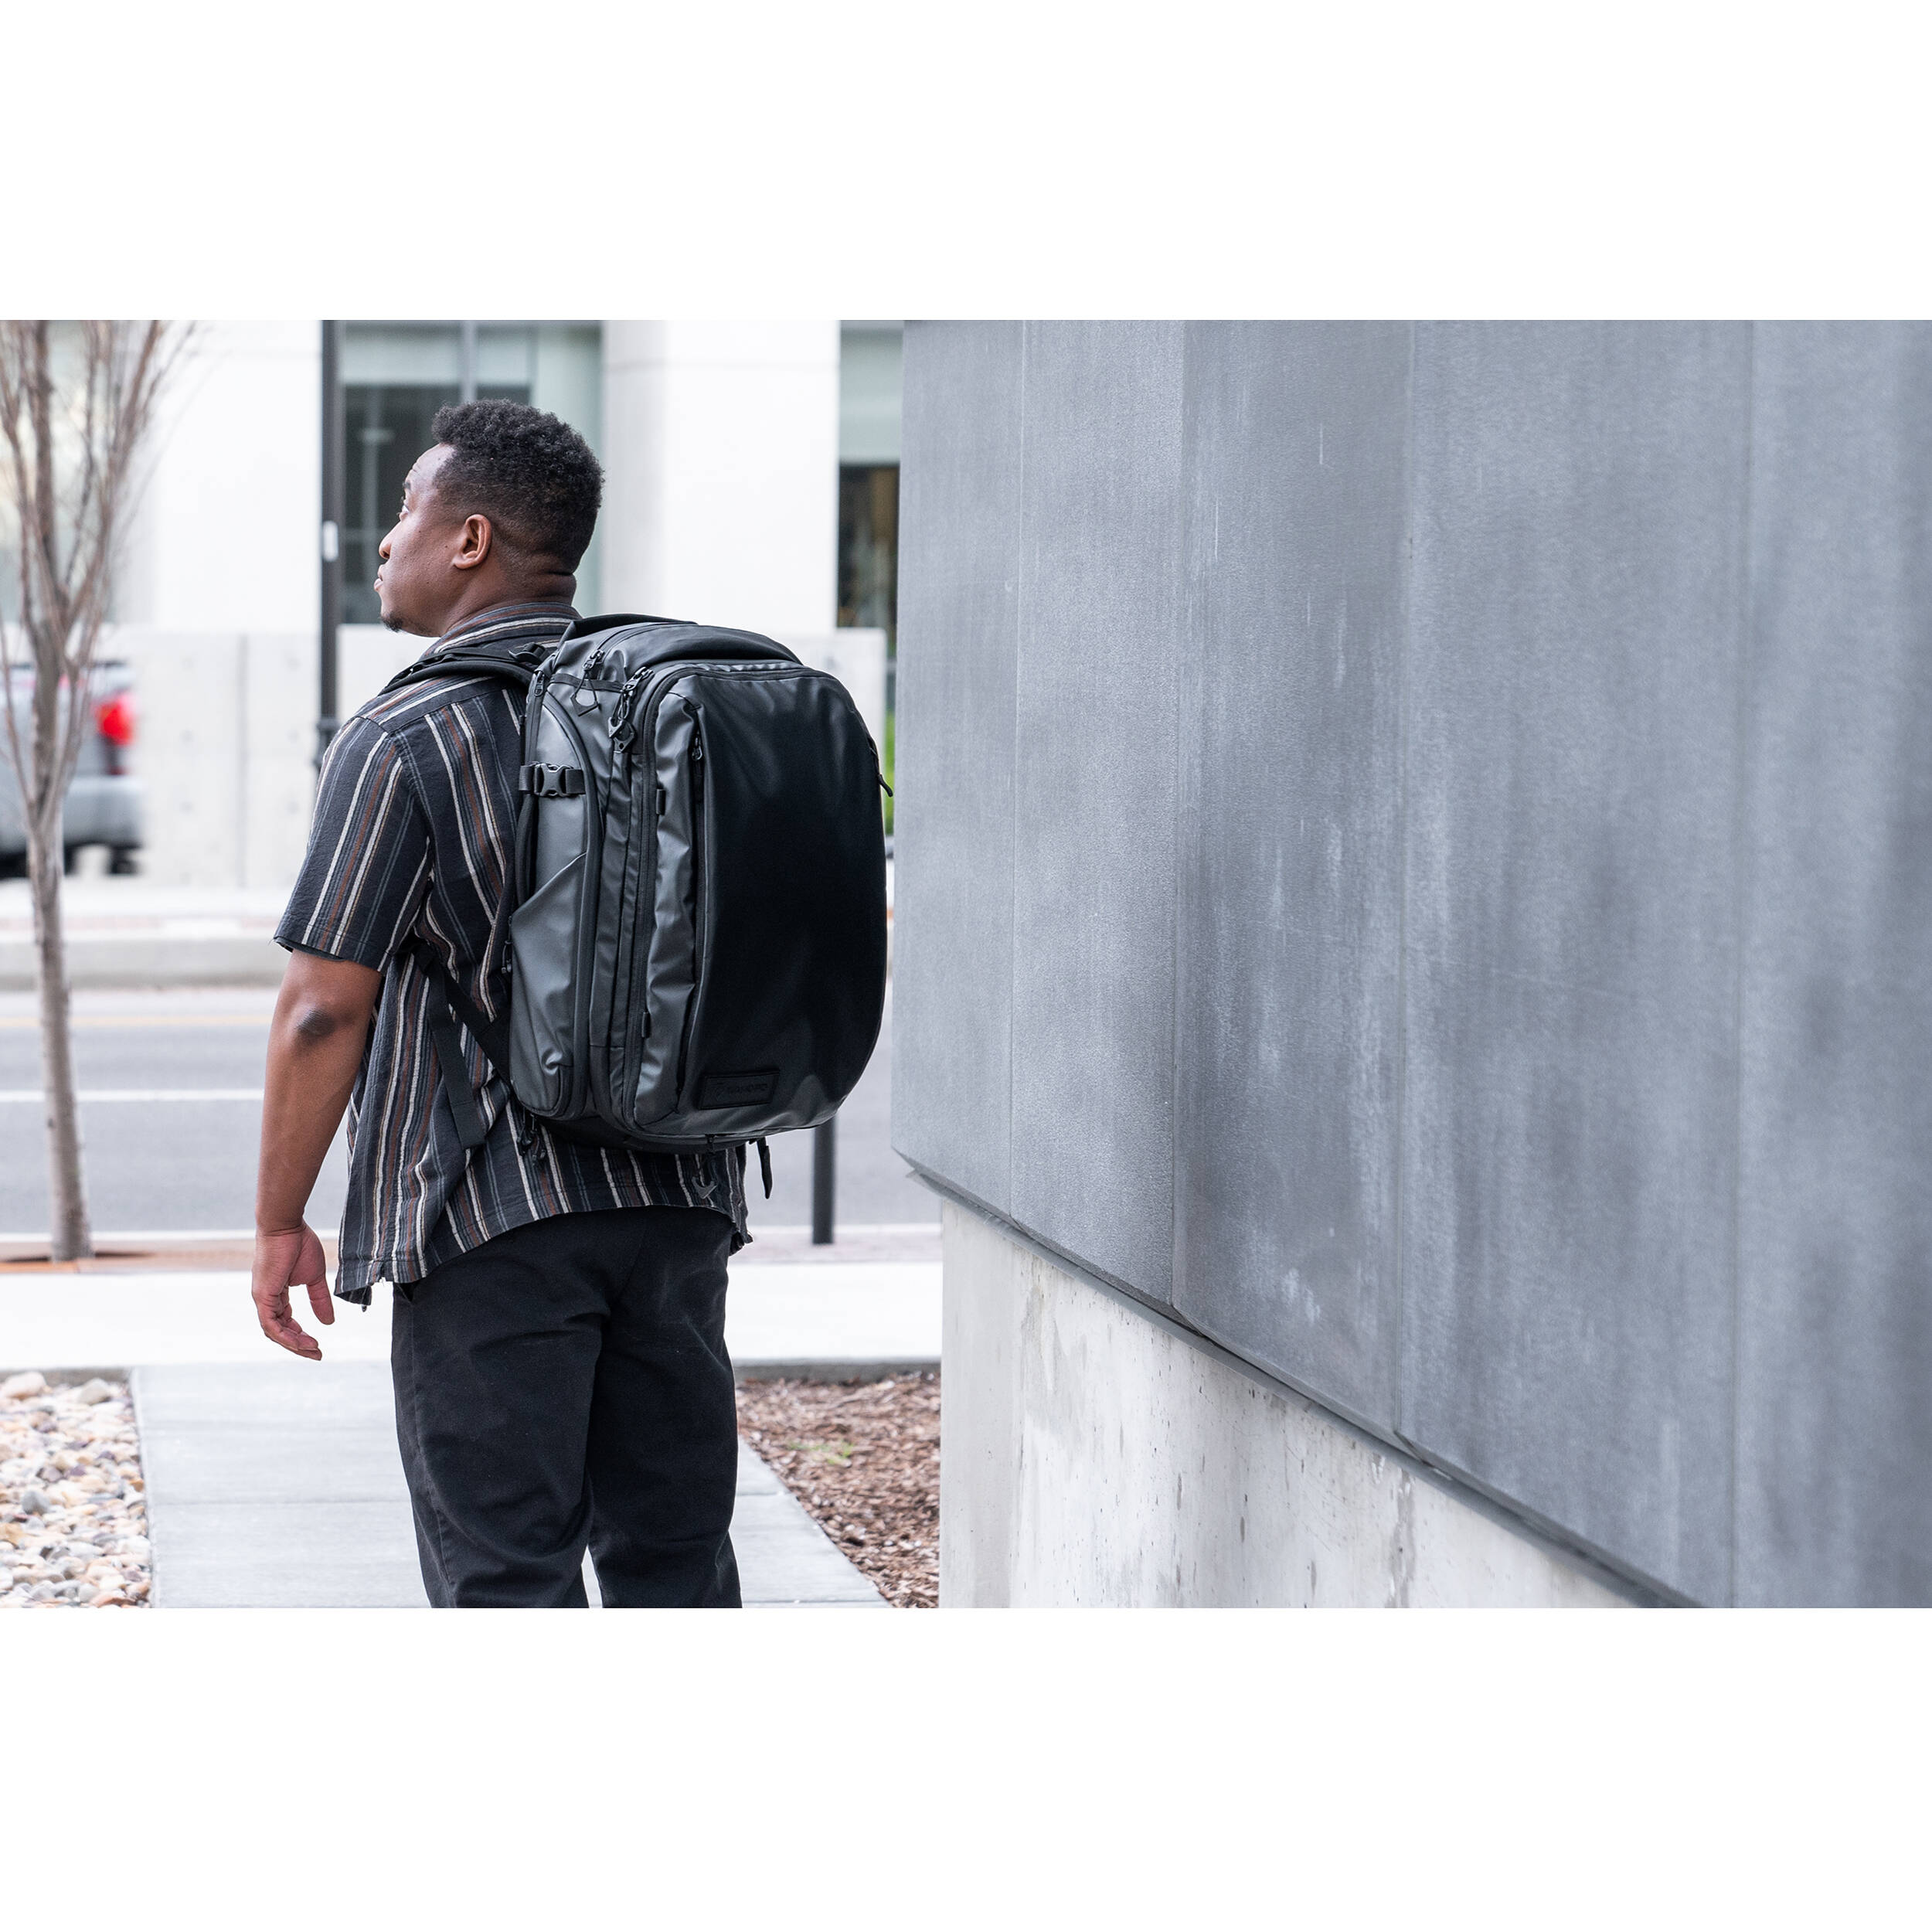 WANDRD Transit Travel Backpack - 45L - Black - with Essential Camera Cube